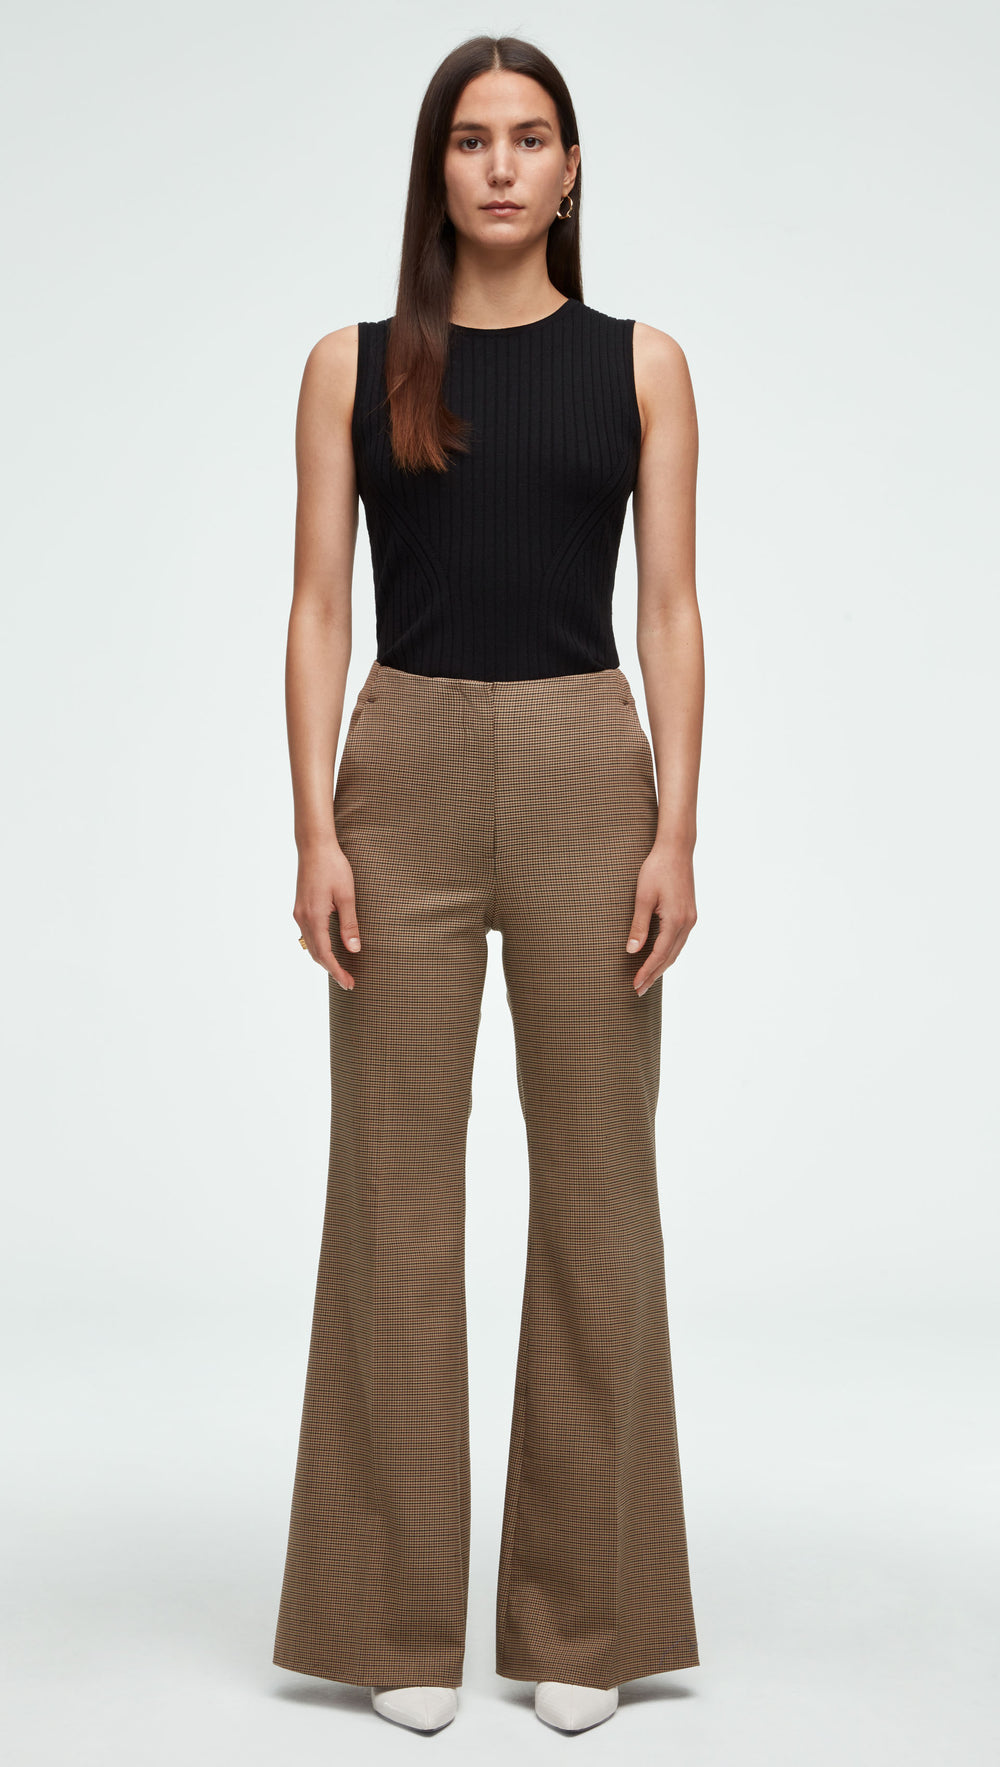 High-Waisted Flare Trouser in Stretch Wool, Women's Pants